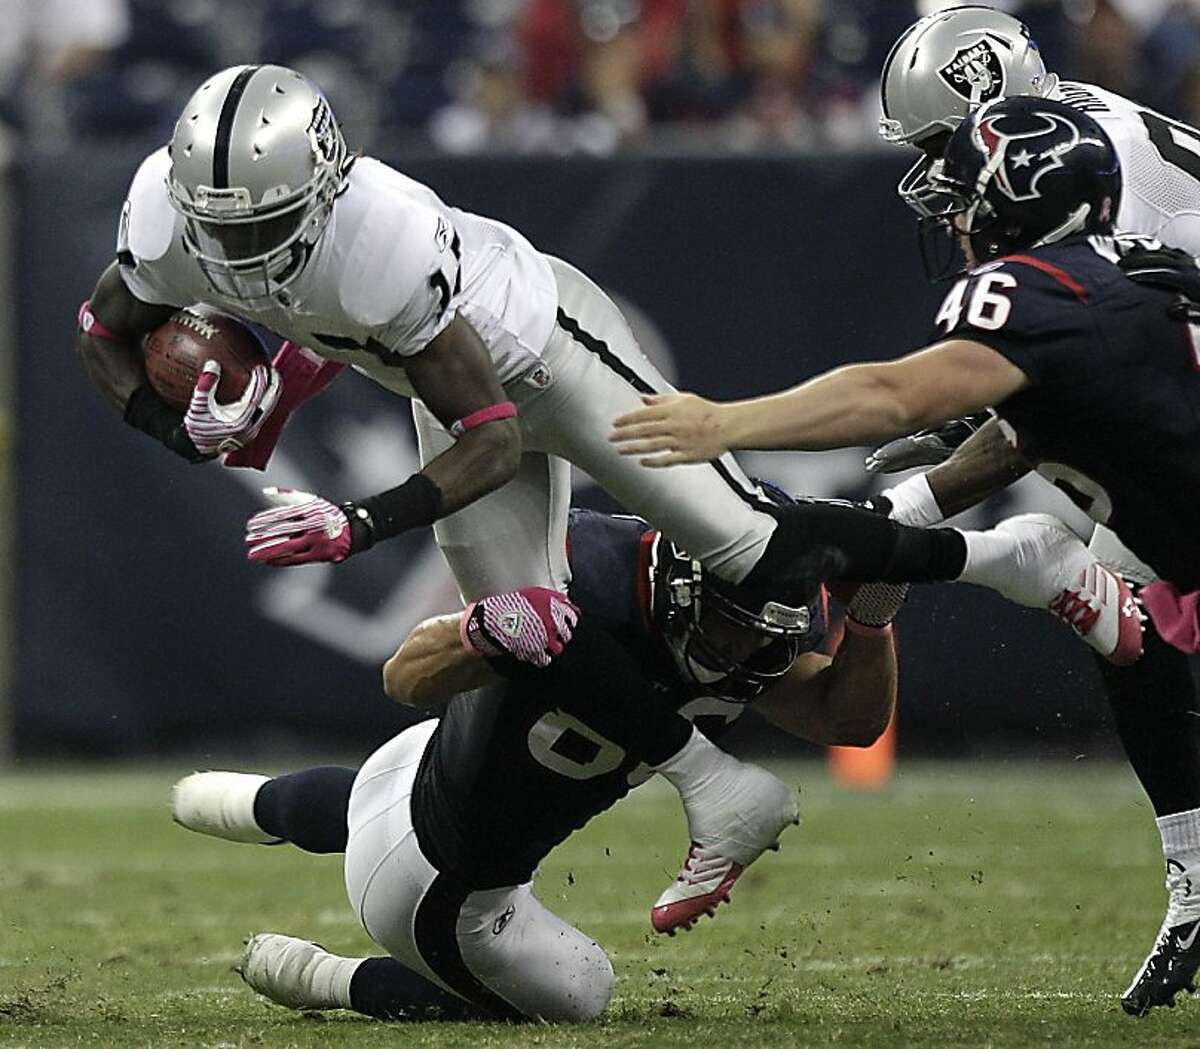 Oakland Raiders wide receiver Denarius Moore (17) is tripped up by Houston Texans tight end James Casey (86) for an 11-yard punt return during the third quarter of an NFL football game at Reliant Stadium on Sunday, Oct. 9, 2011, in Houston. The Raiders beat the Texans 25-20. ( Brett Coomer / Houston Chronicle )